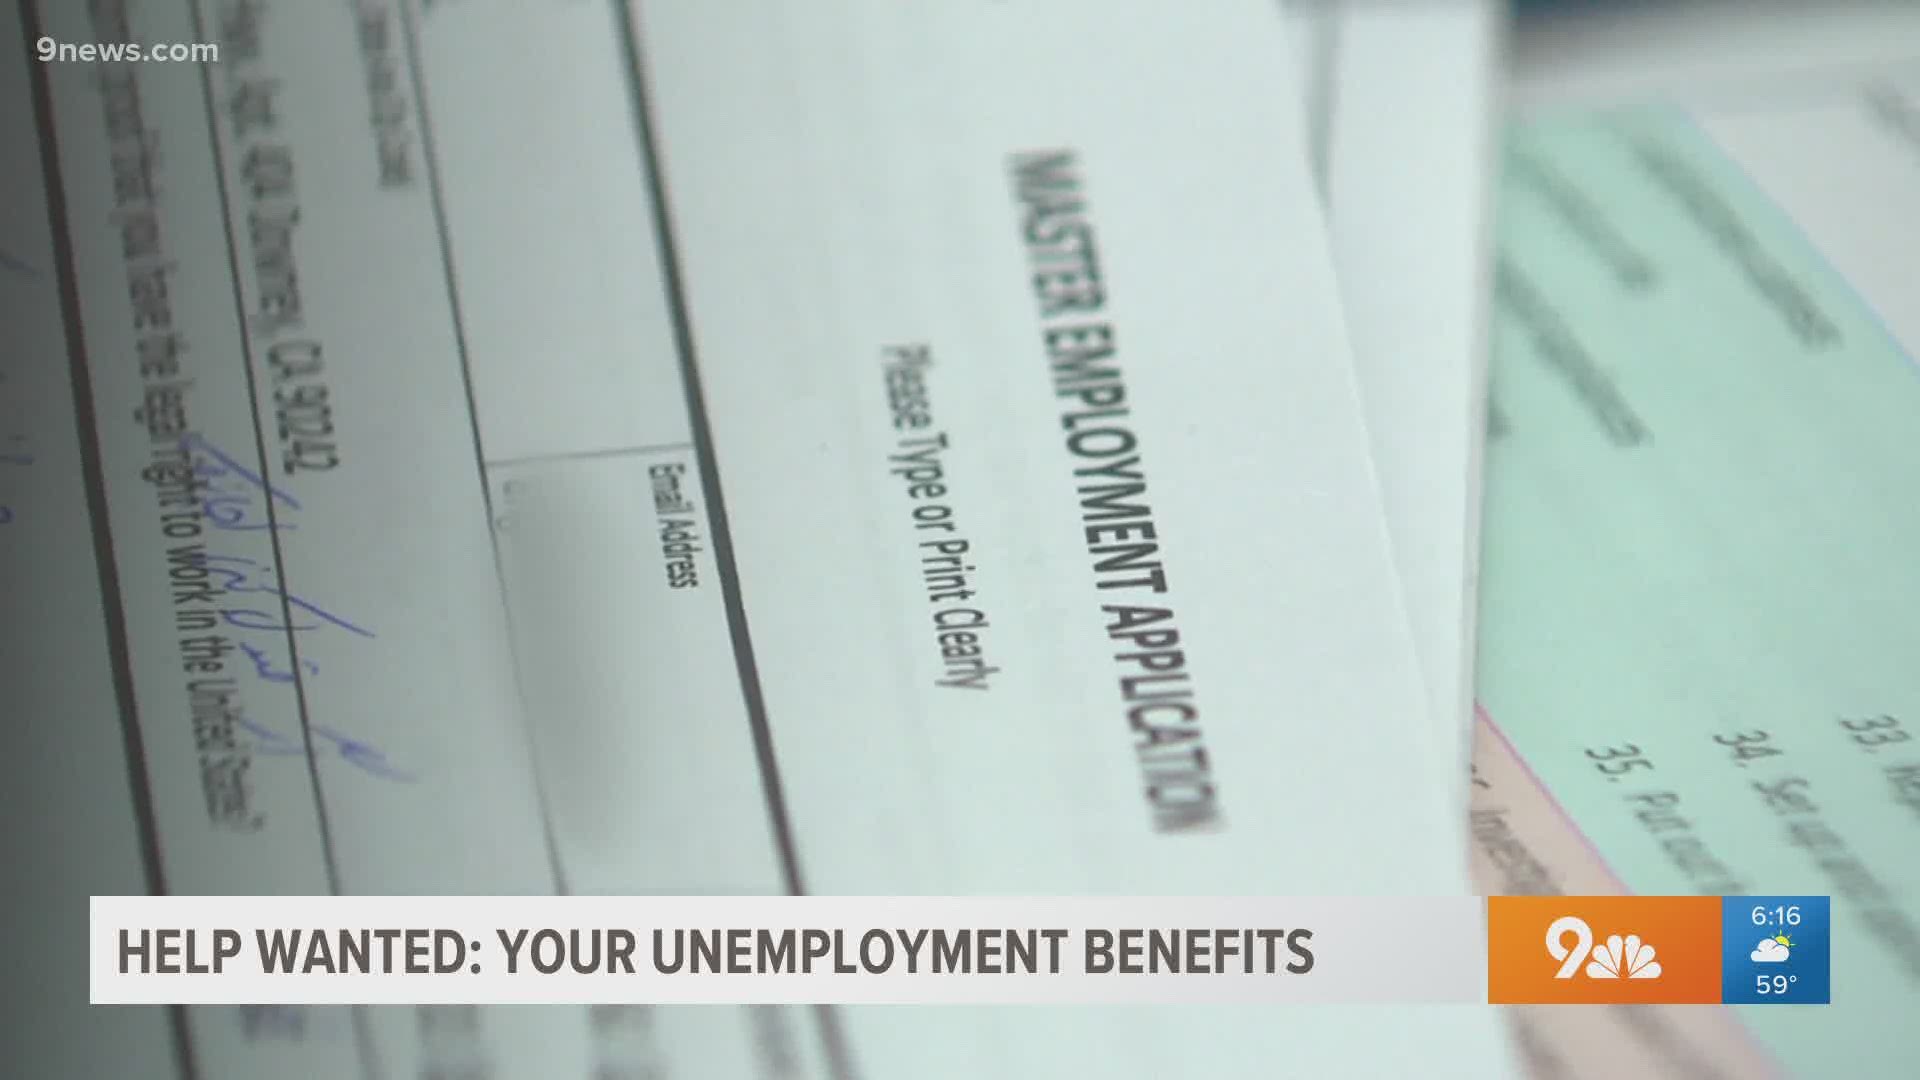 Many Coloradans have unemployment questions as the system tries to keep up during the COVID-19 pandemic. Legal expert Whitney Traylor addresses some common concerns.